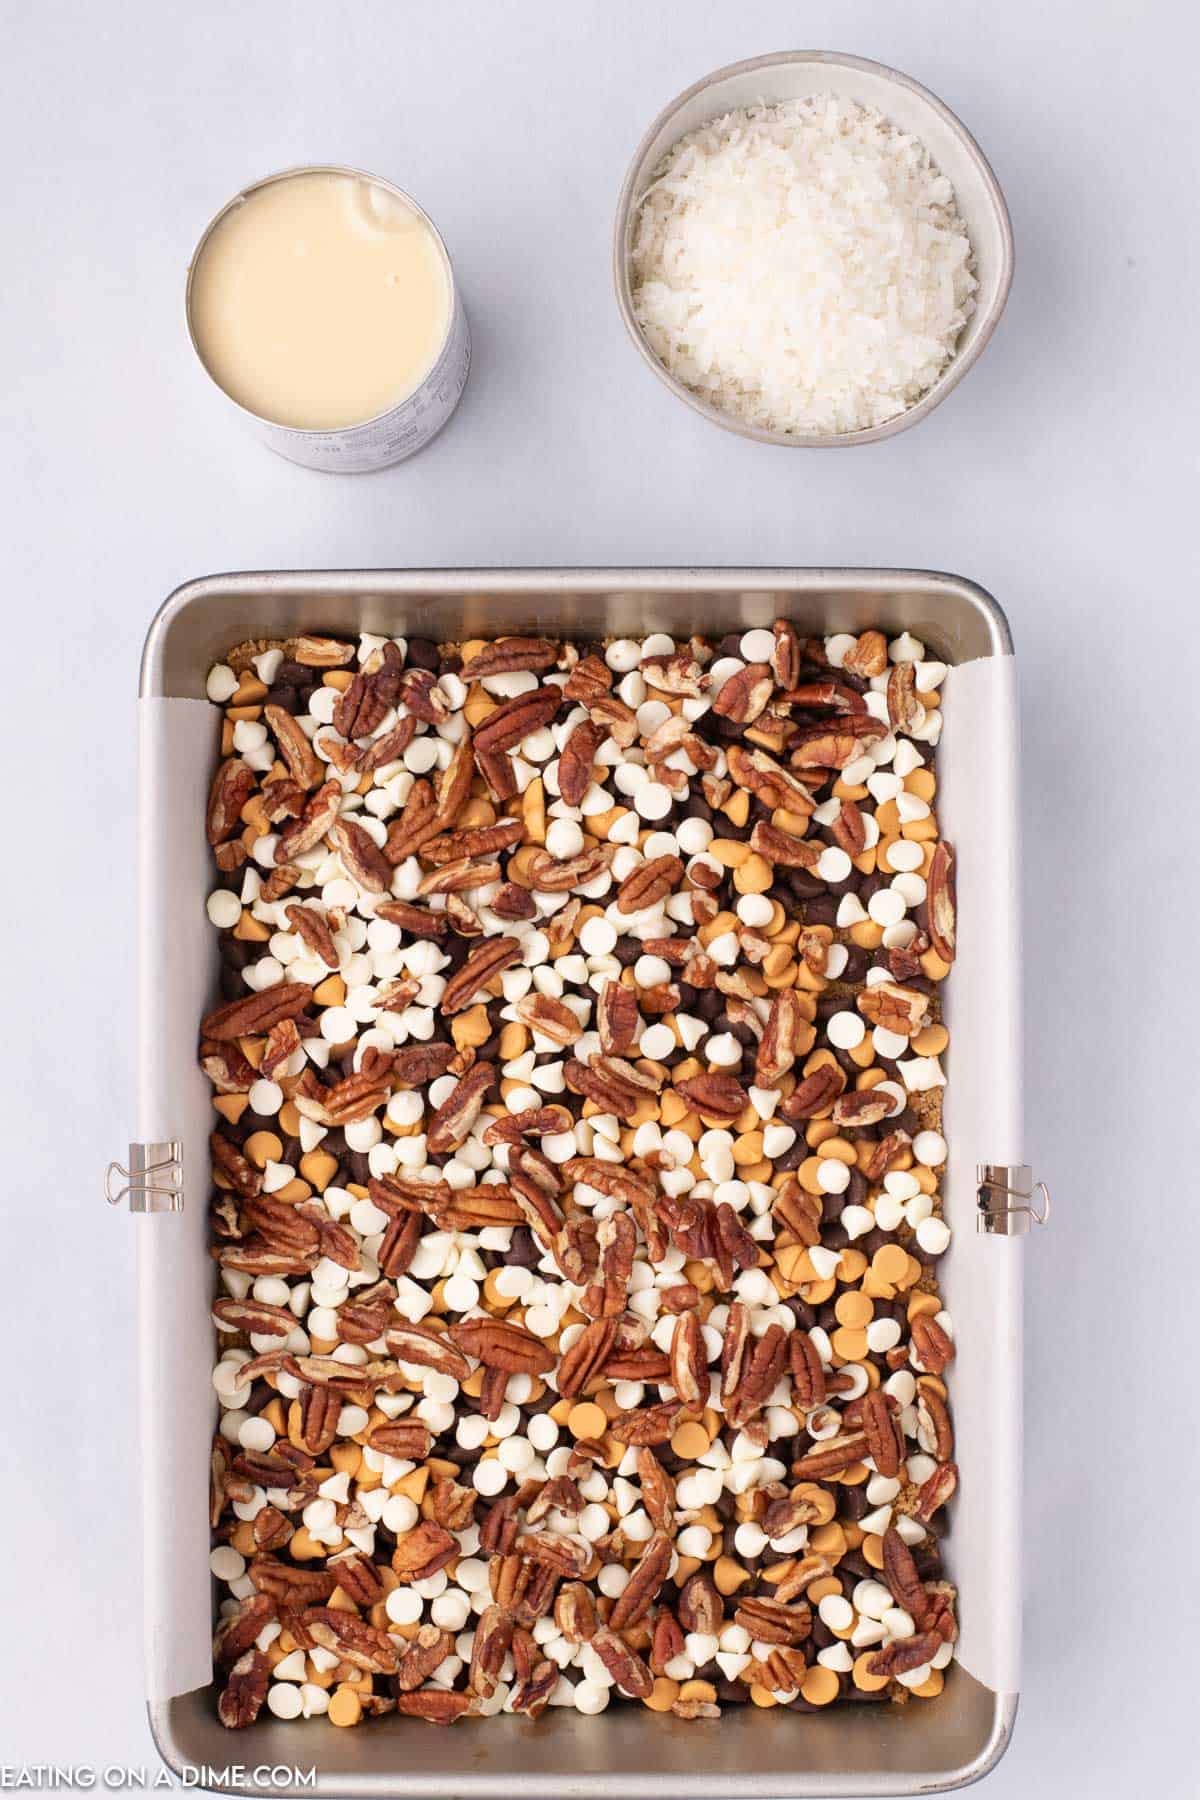 Pecans, chocolate chips topped on a graham cracker crust with a can of evaporated milk and shredded coconut